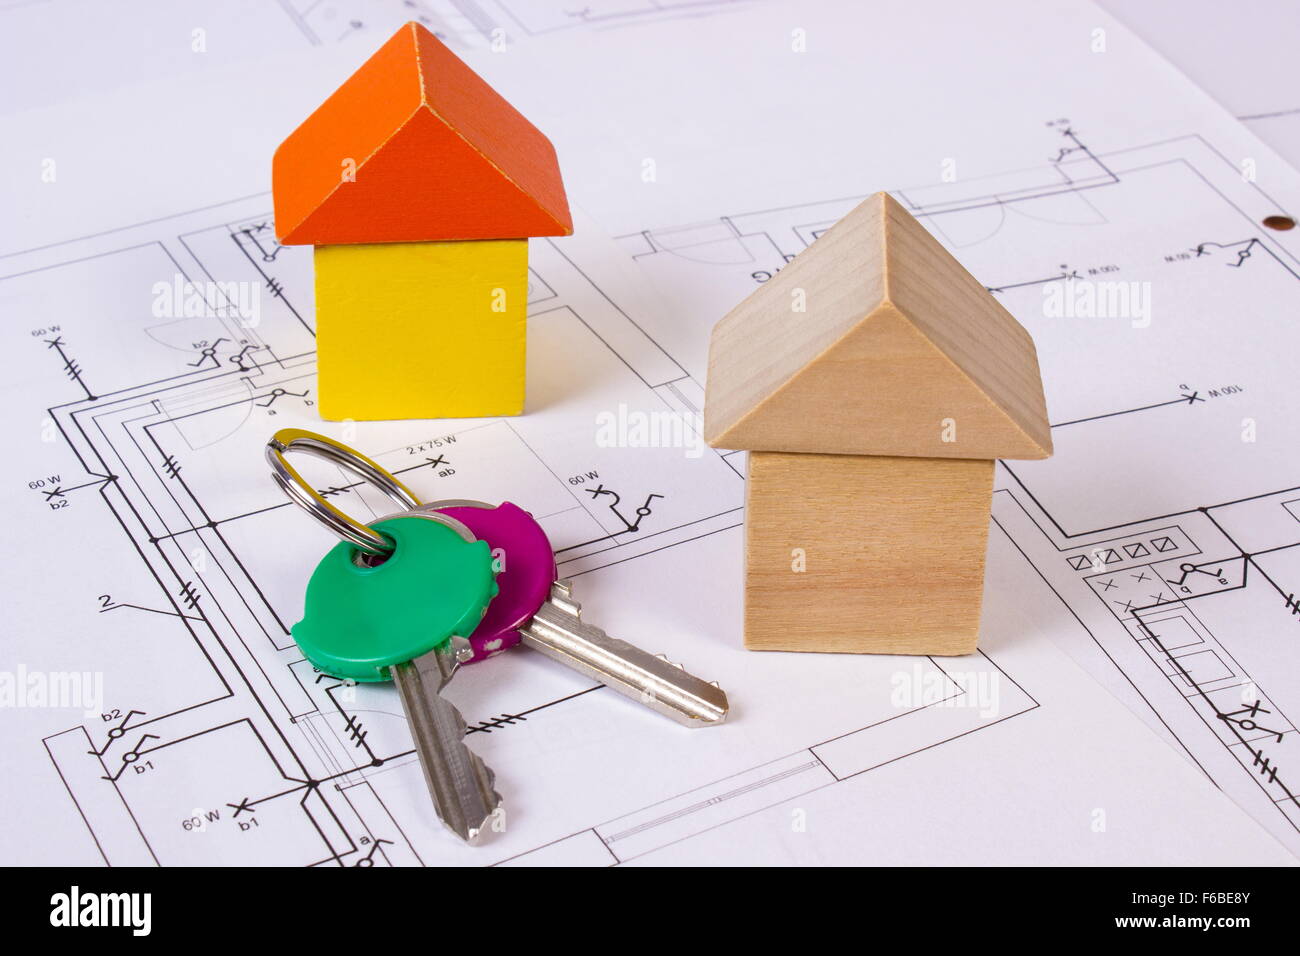 Houses shape made of wooden blocks and home keys lying on electrical construction drawings of house, concept of building house, Stock Photo